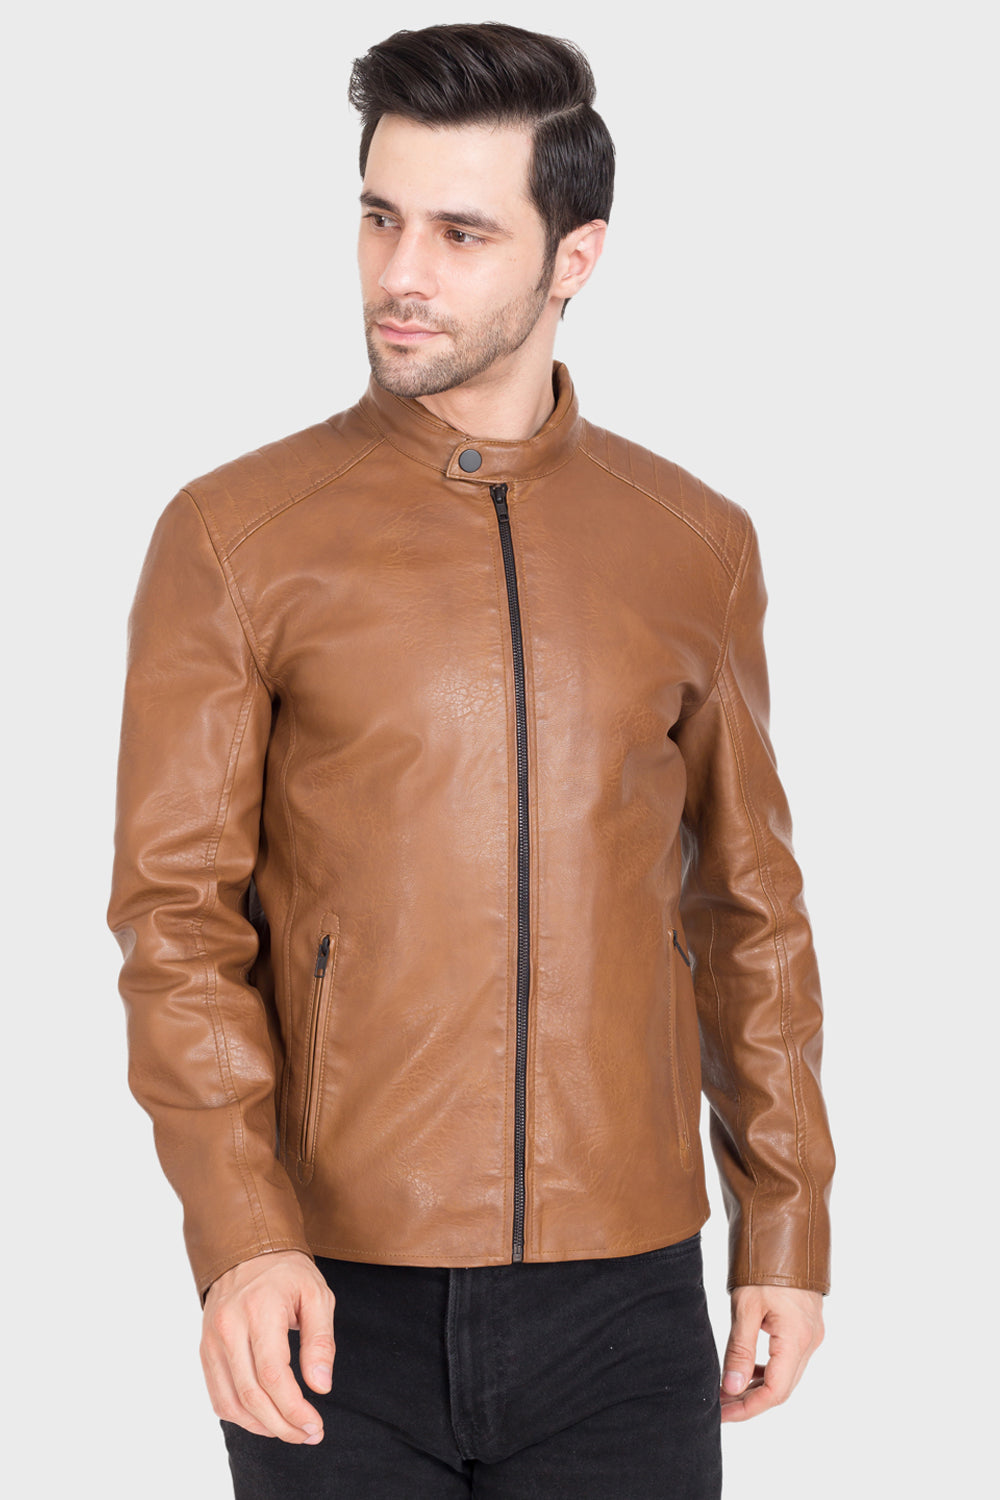 Justanned Ochre Brown Leather Jacket